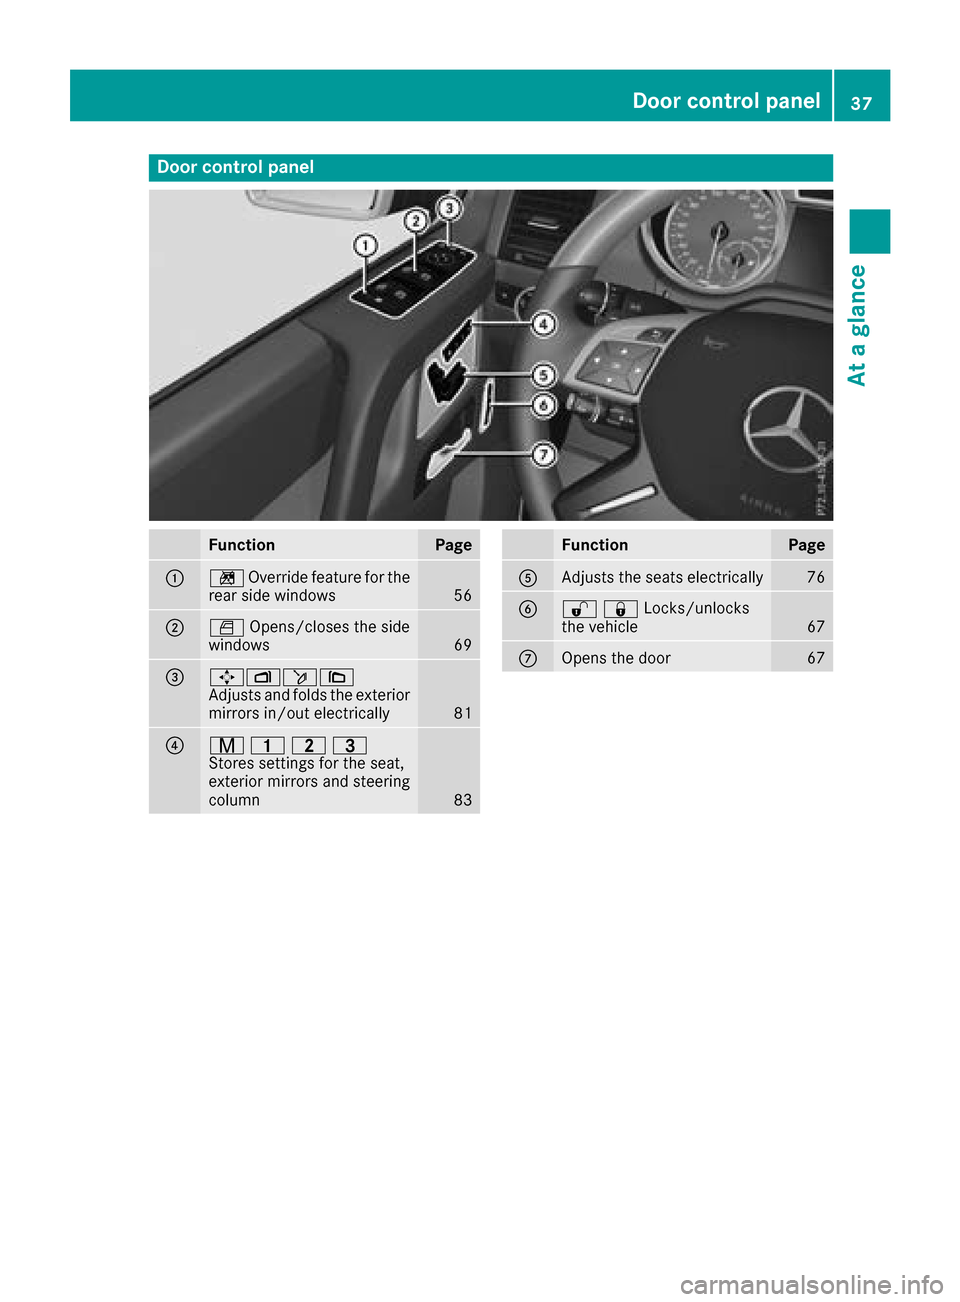 MERCEDES-BENZ G-Class 2017 W463 Owners Guide Door controlpanel
FunctionPage
:n Override feature fo rthe
rea rsidew indows56
;W Opens/closes th eside
windows69
=7Z ö\
Adjust sand folds th eexter ior
mirrors in/out electrically
81
?r 45=
Stores s